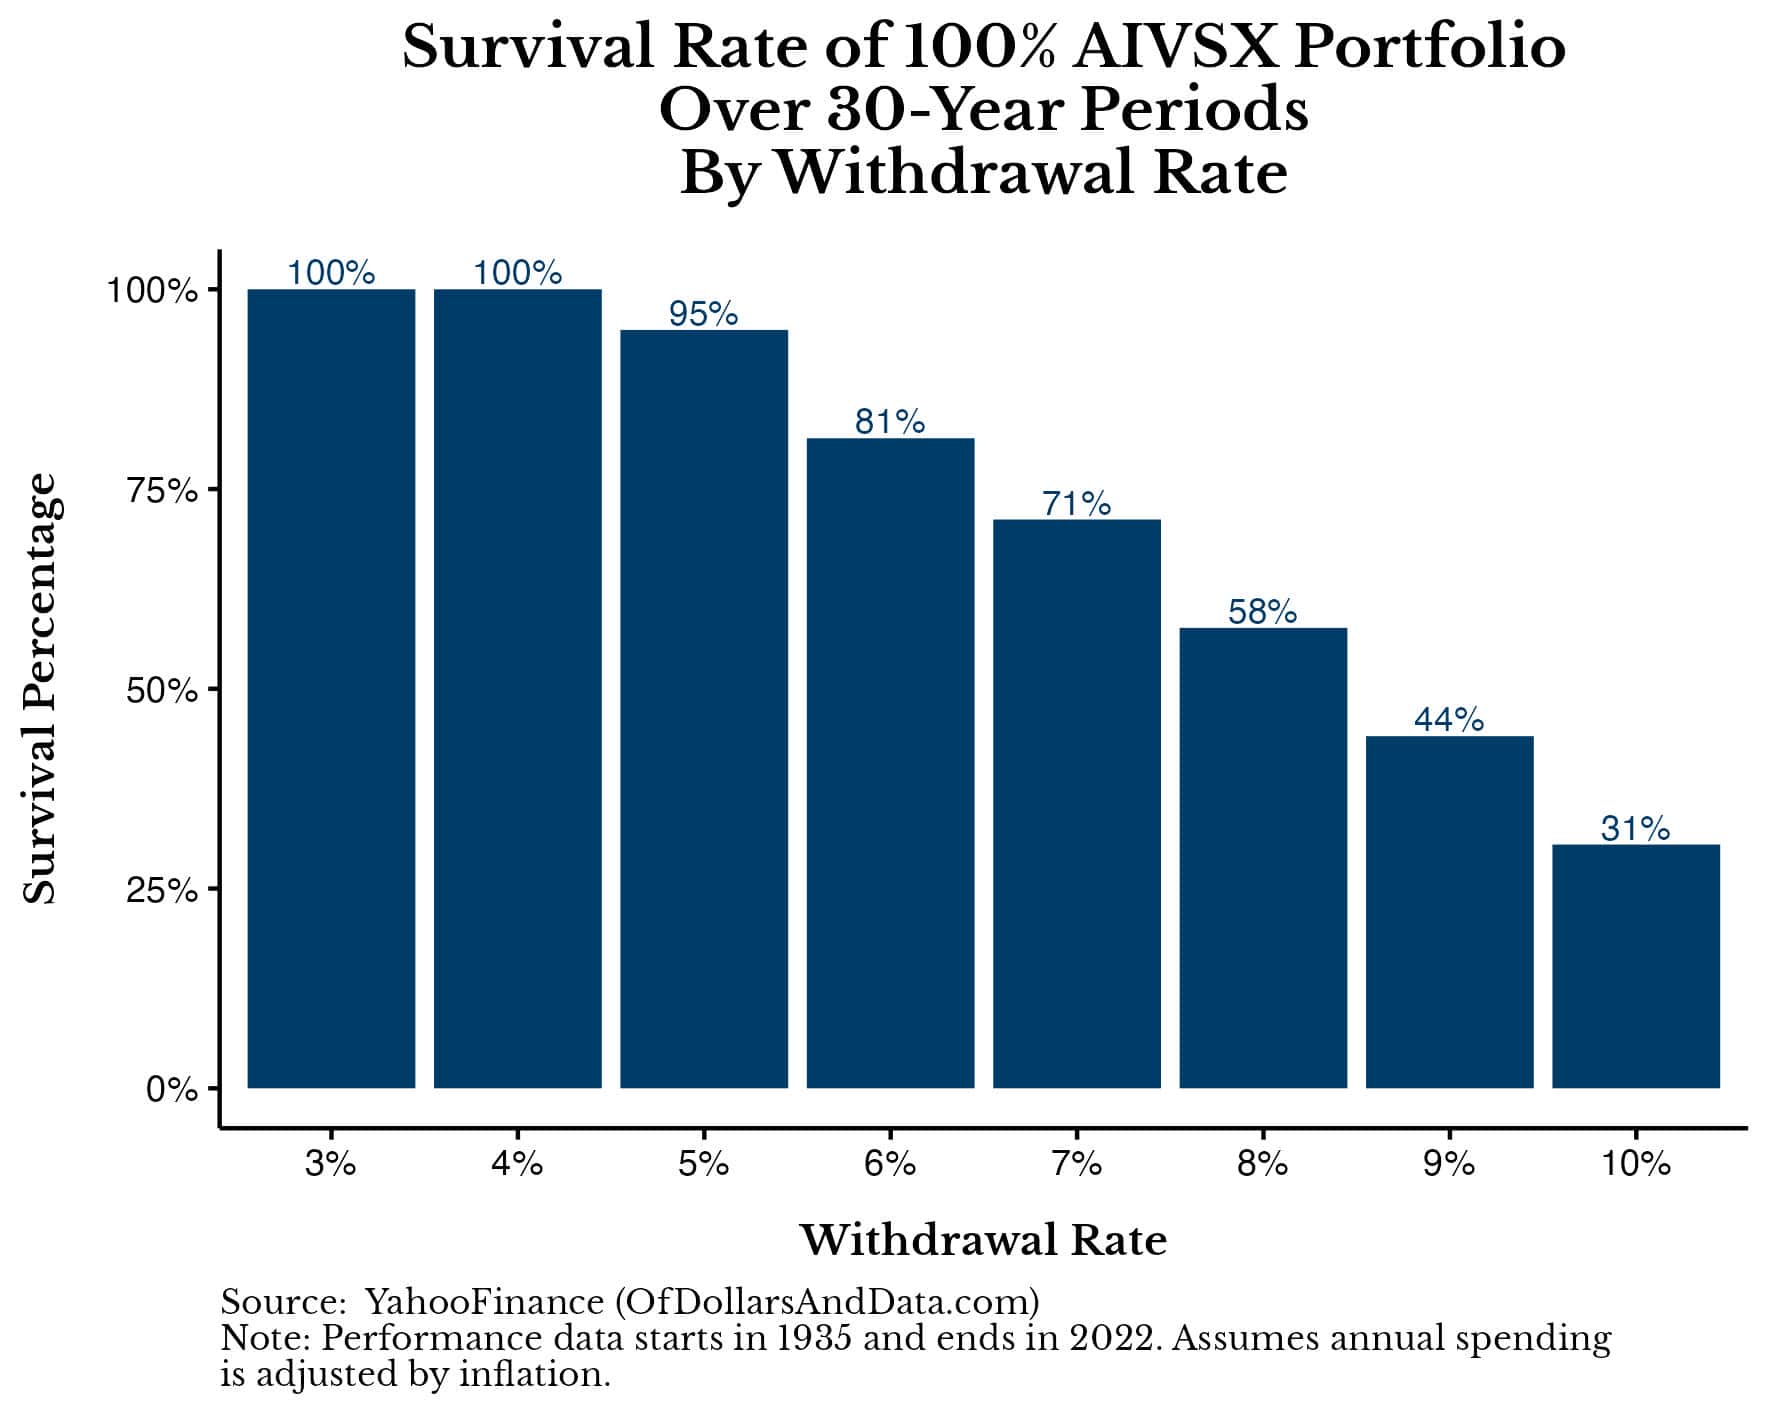 Chart of survival rate of 100% AIVSX portfolio over 30 year periods by withdrawal rate.